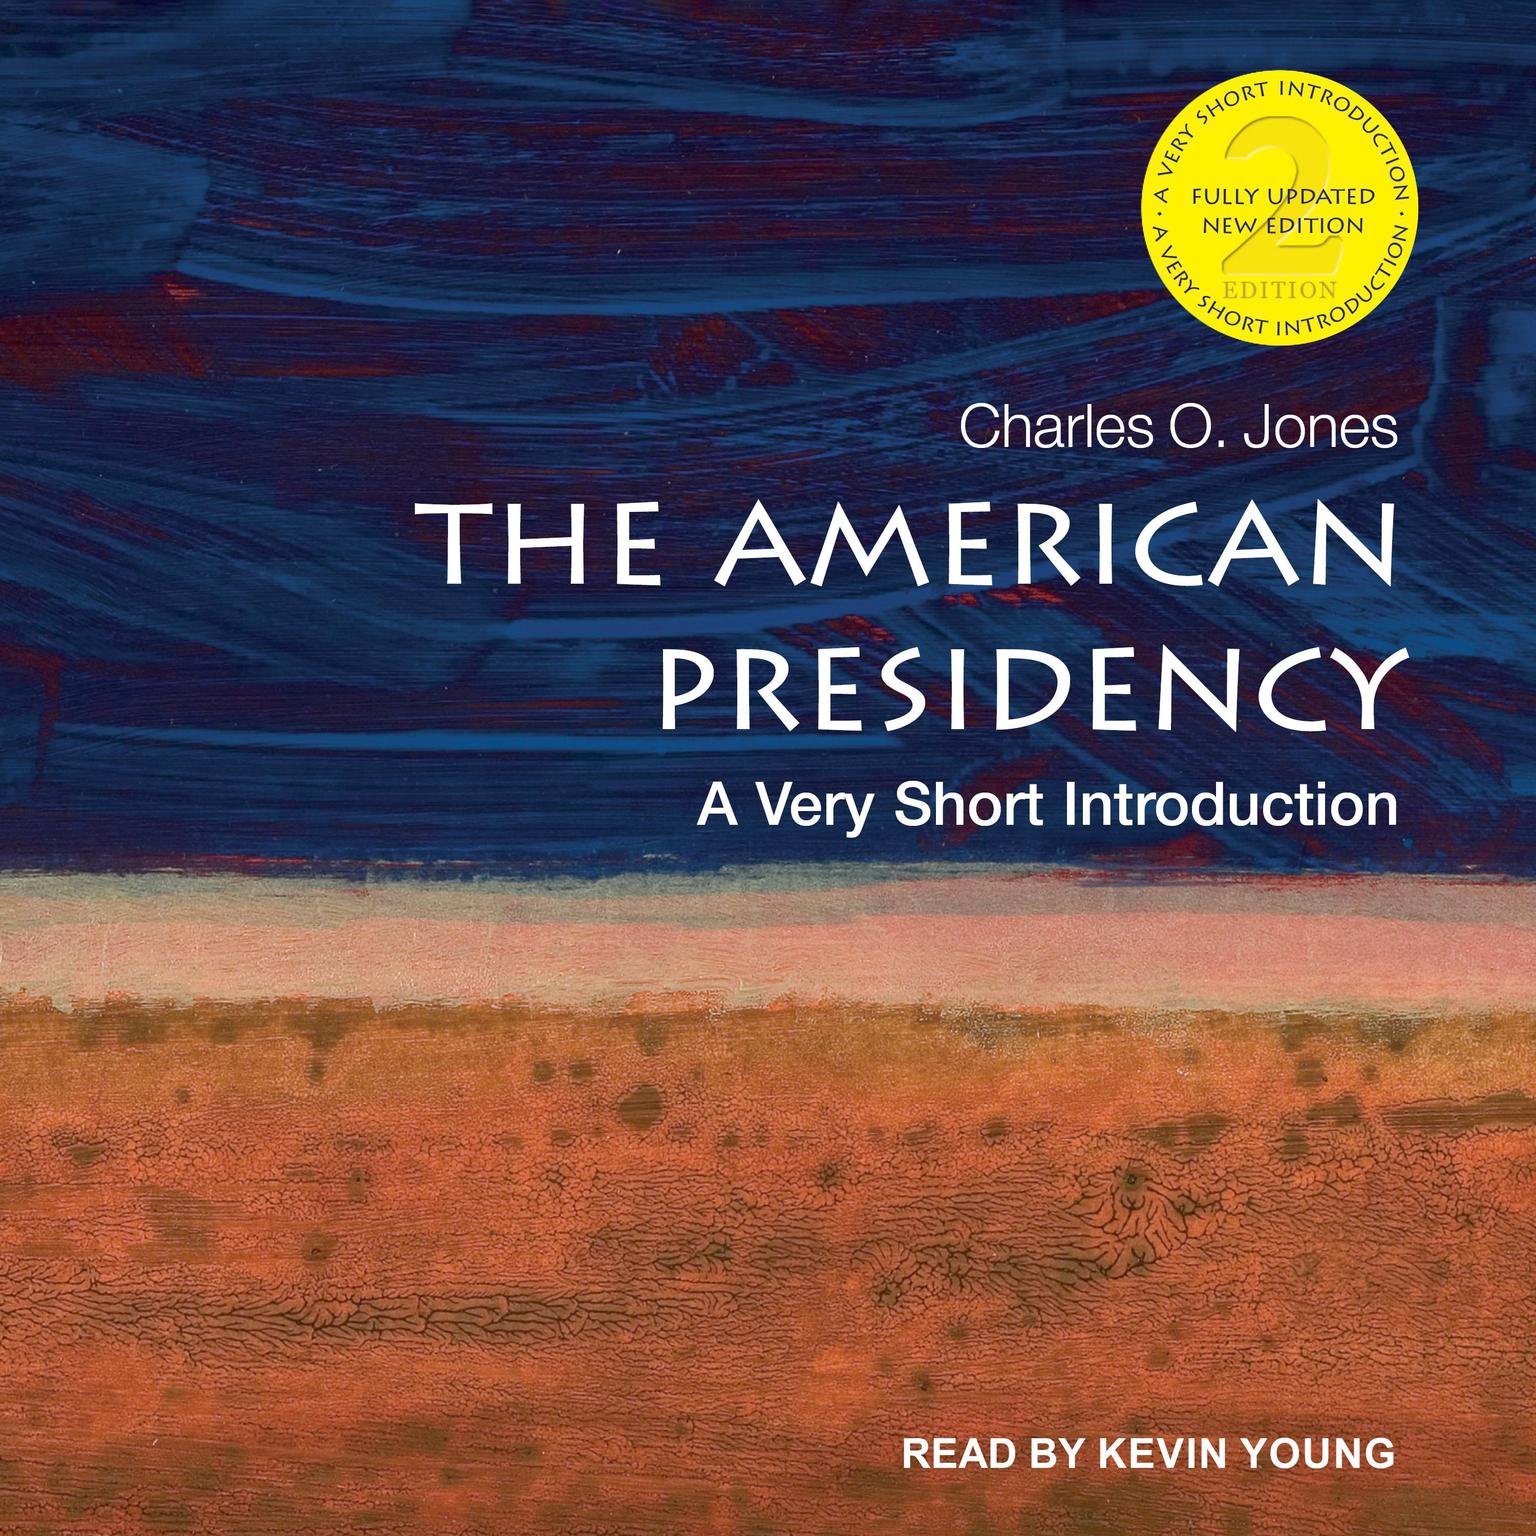 The American Presidency: A Very Short Introduction (2nd Edition) Audiobook, by Charles O. Jones